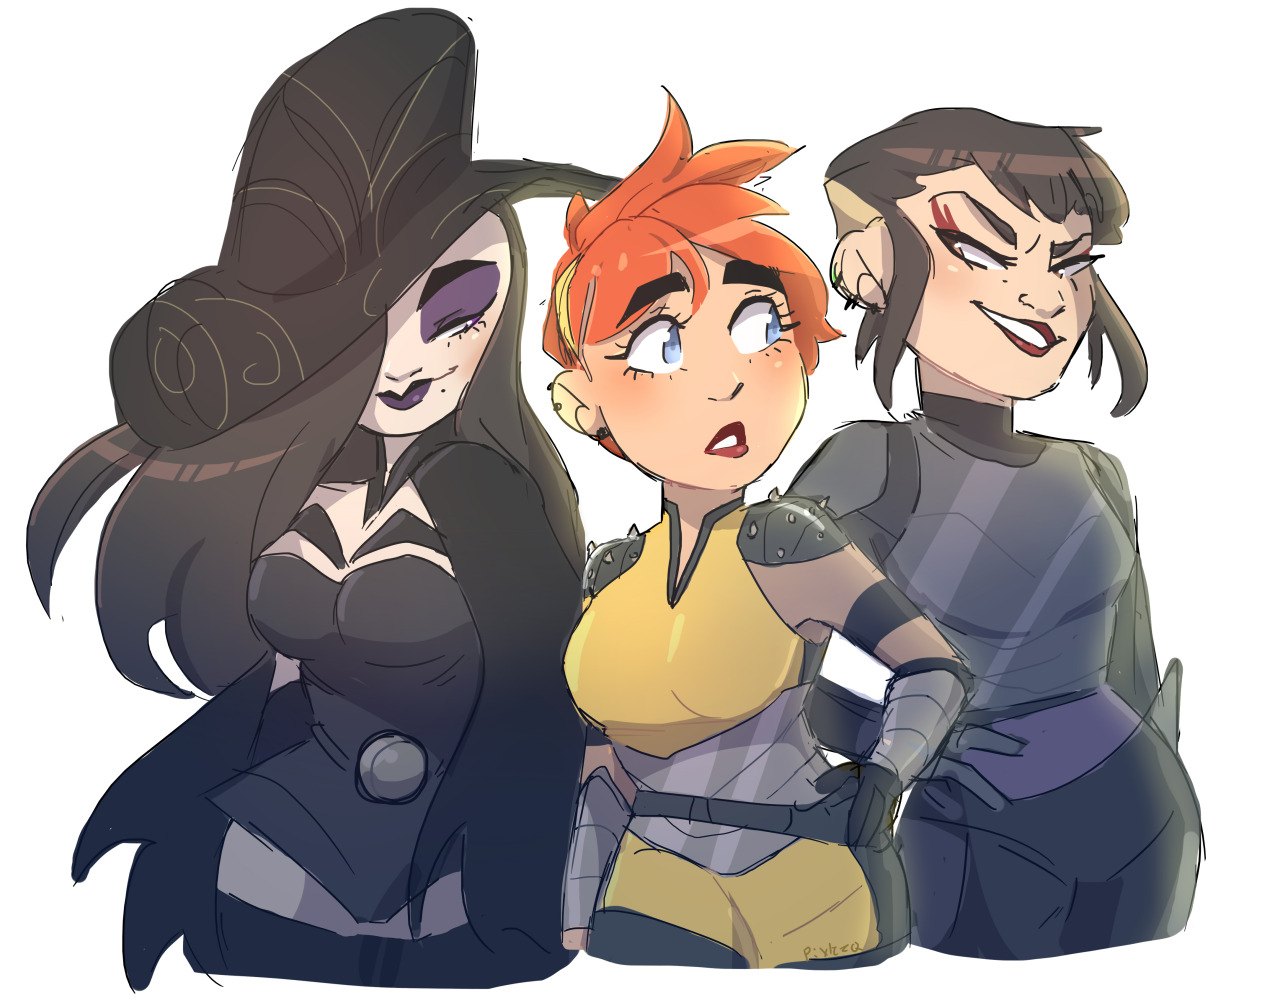 pixlezq:I want the three of them to become #galpals and teach April in the ways of